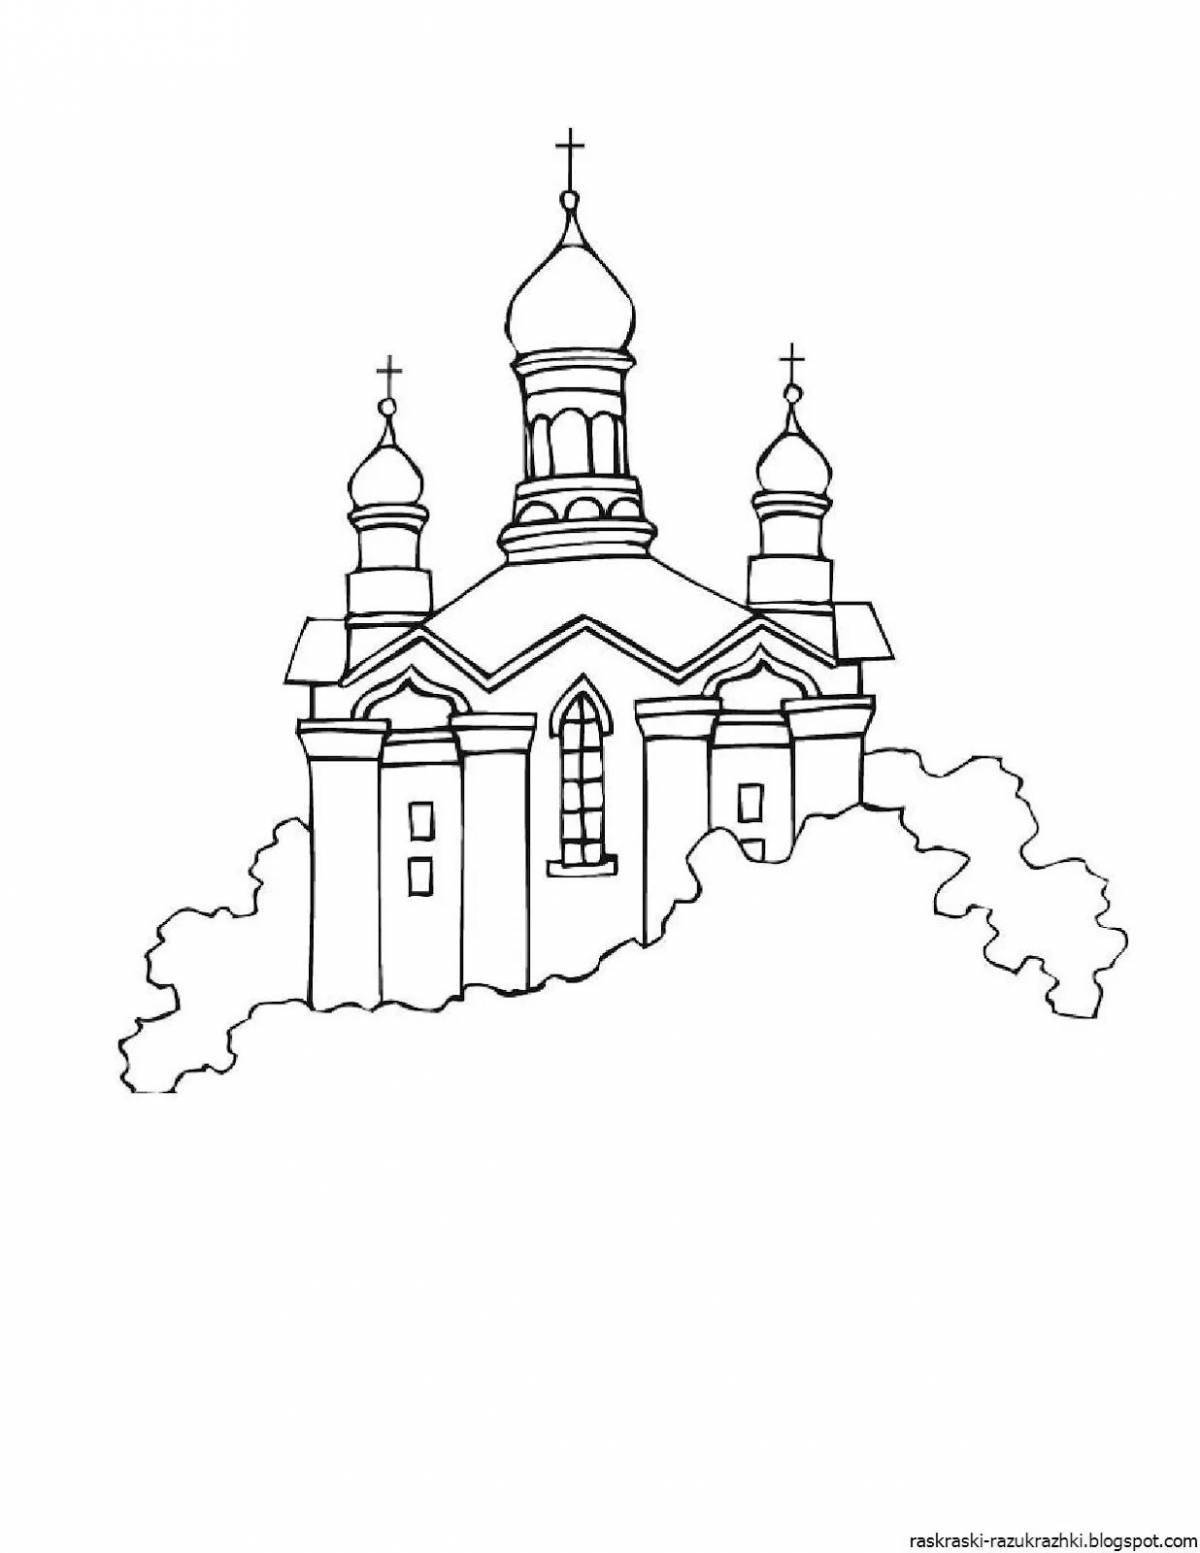 Coloring page elegant church with domes